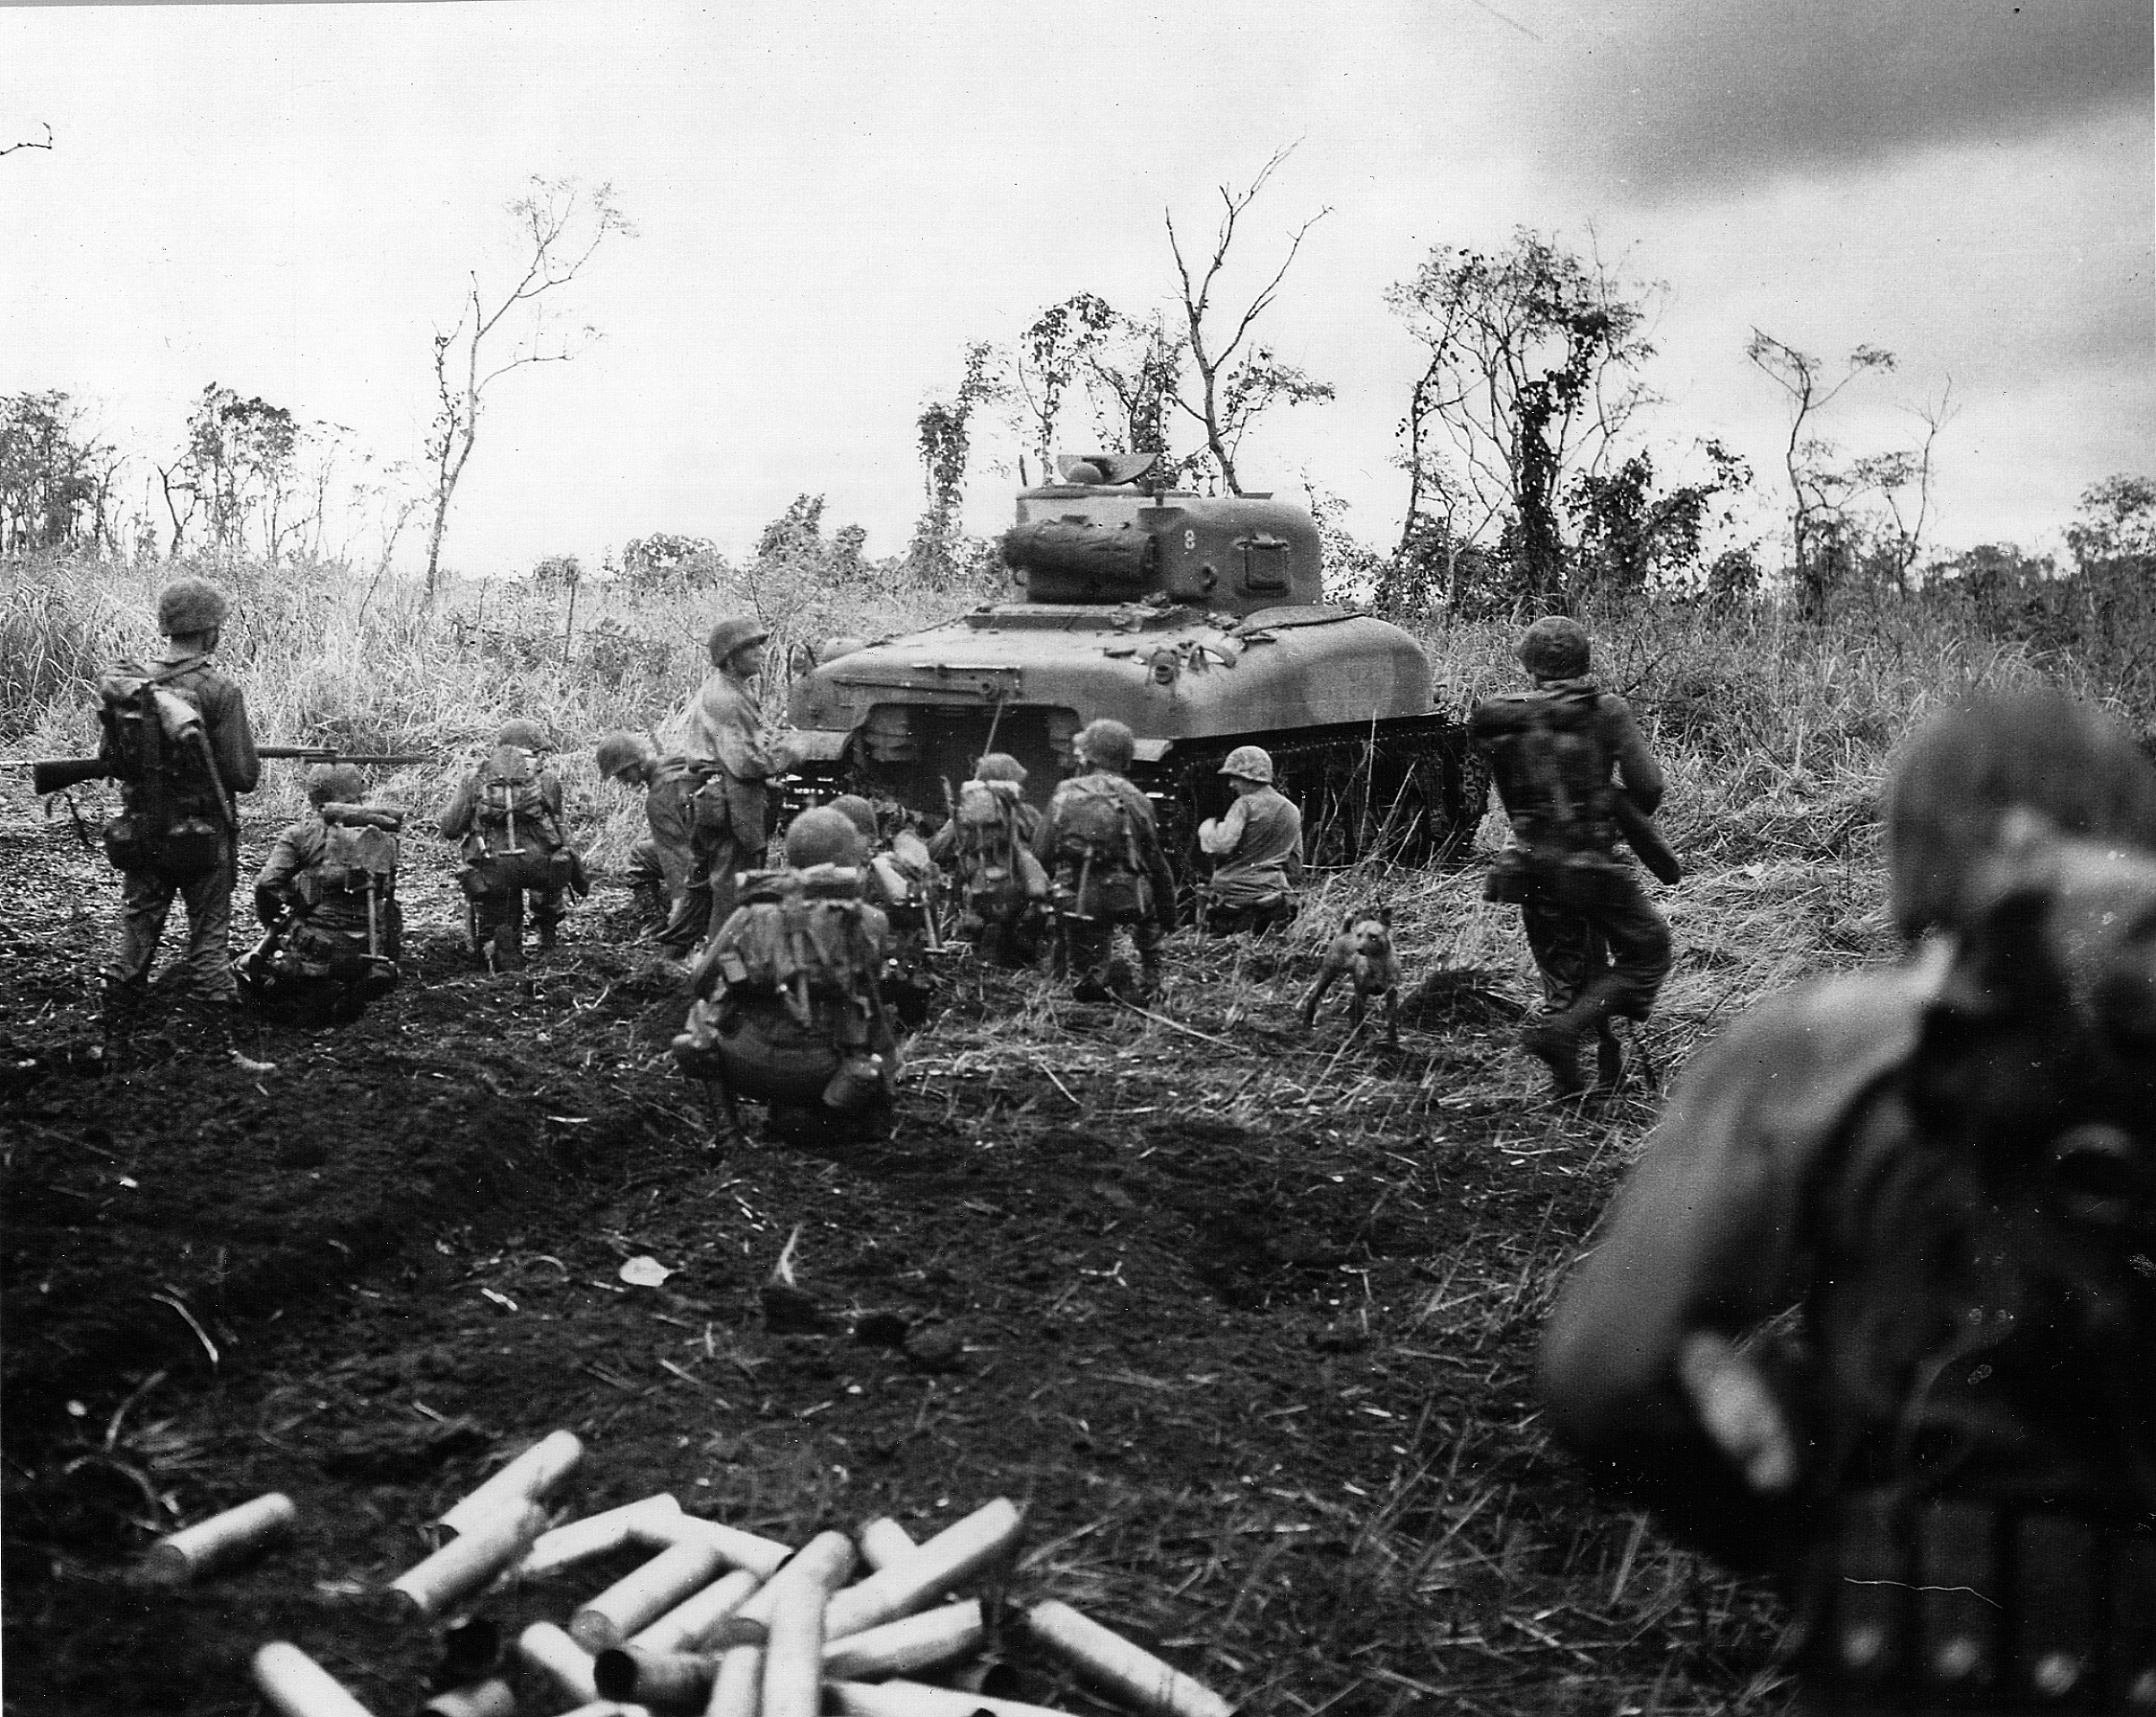 With armor leading the way, U.S. Marines advance on a Japanese pillbox. Often, such enemy strongpoints had to be reduced by individual soldiers with satchel charges or point-blank fire from armored vehicles.